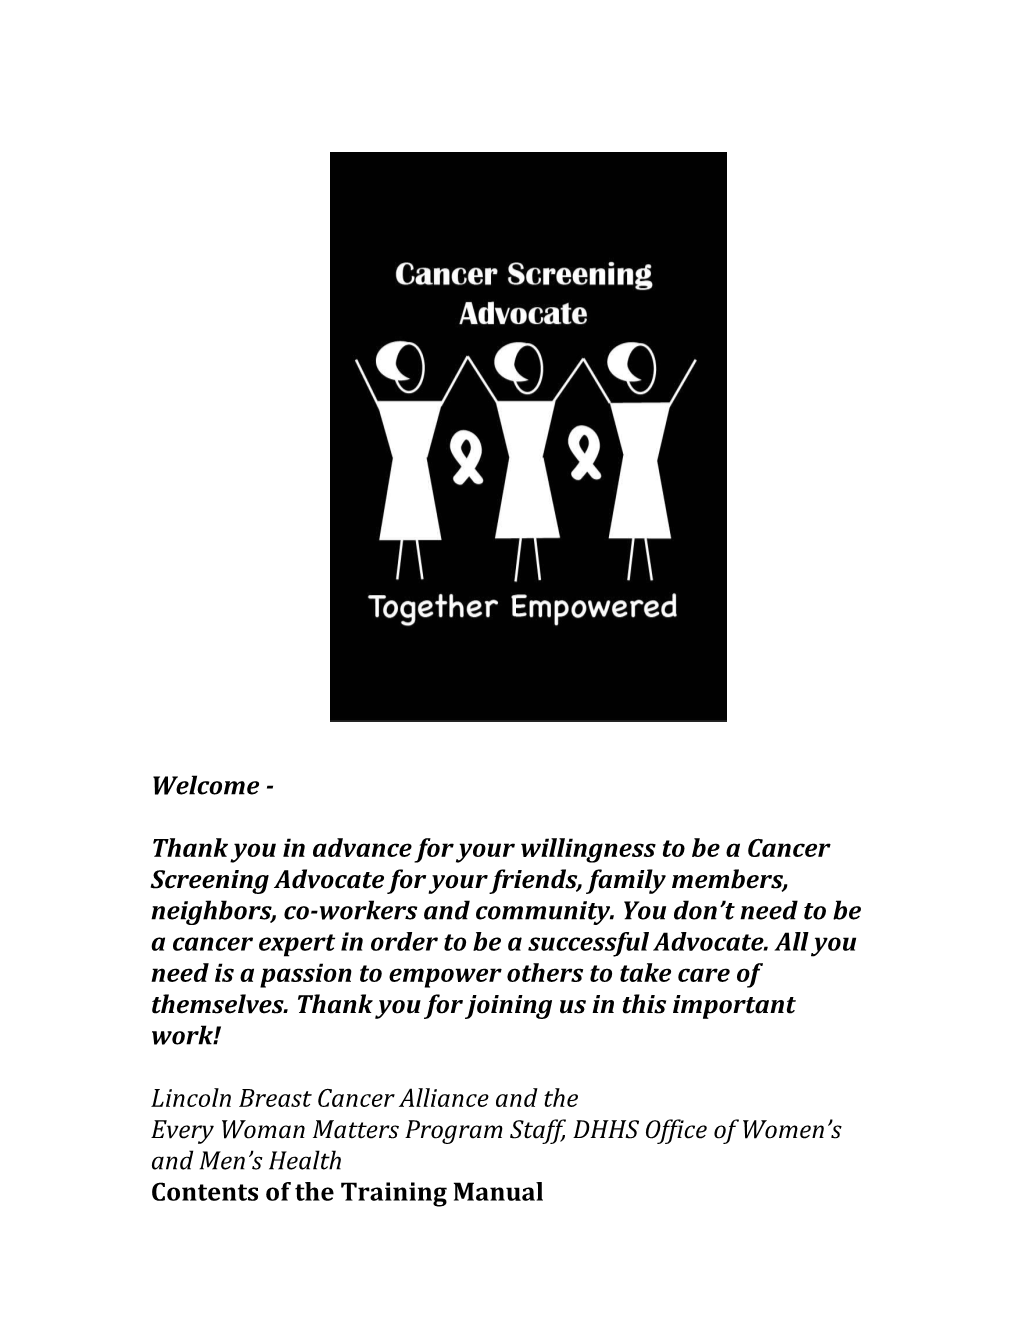 Thank You in Advance for Your Willingness to Be a Cancer Screening Advocate for Your Friends